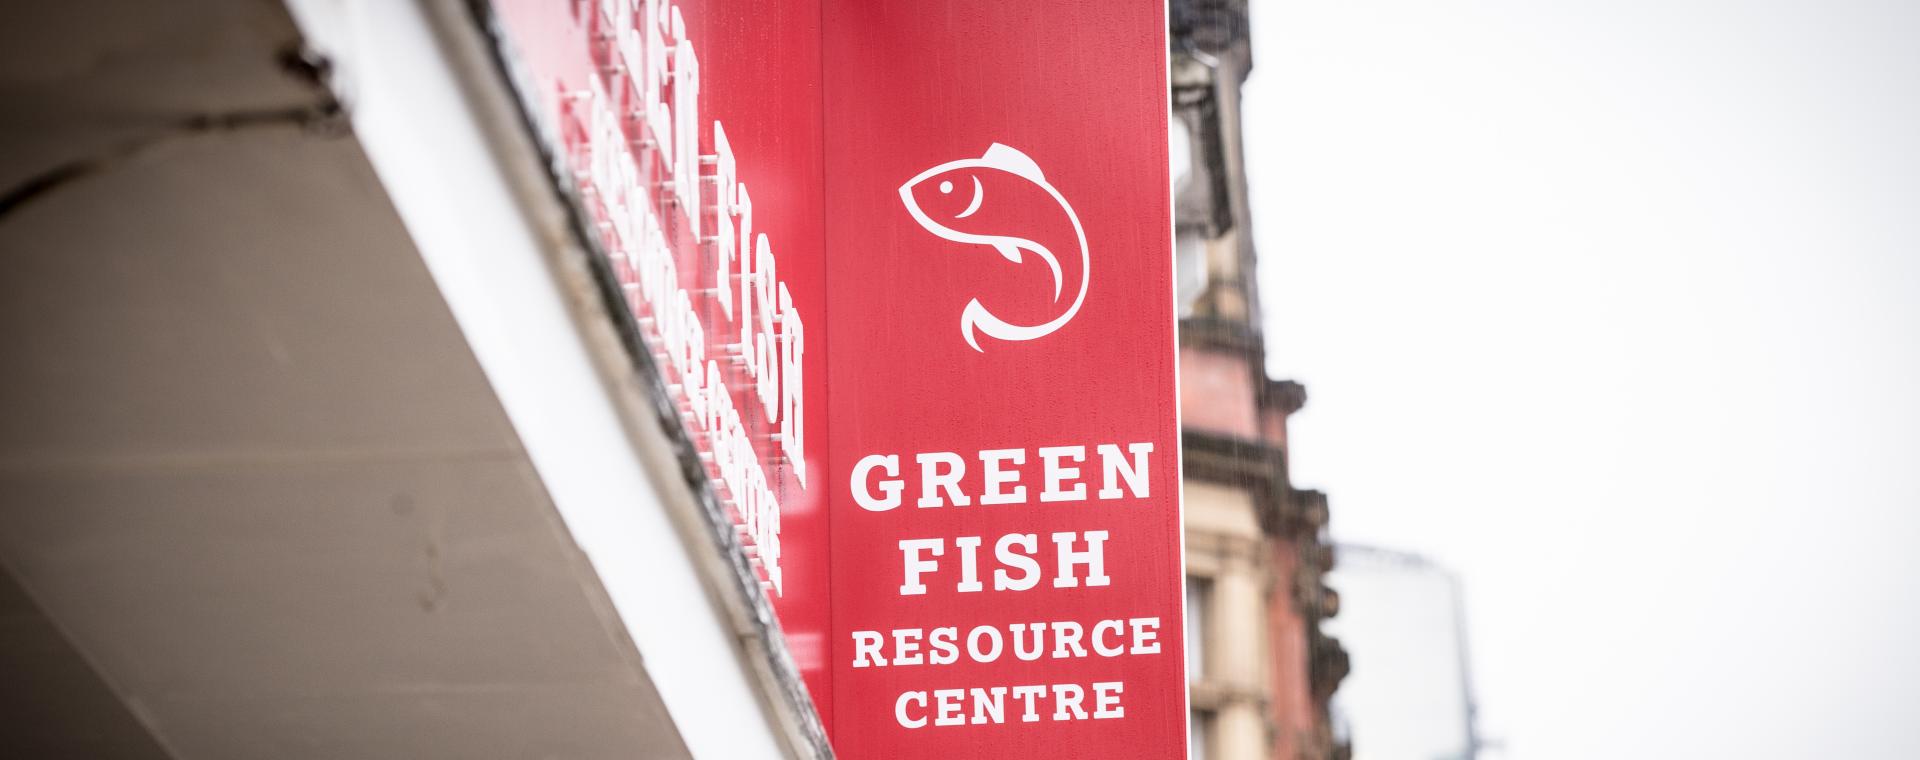 Green Fish, Manchester sign